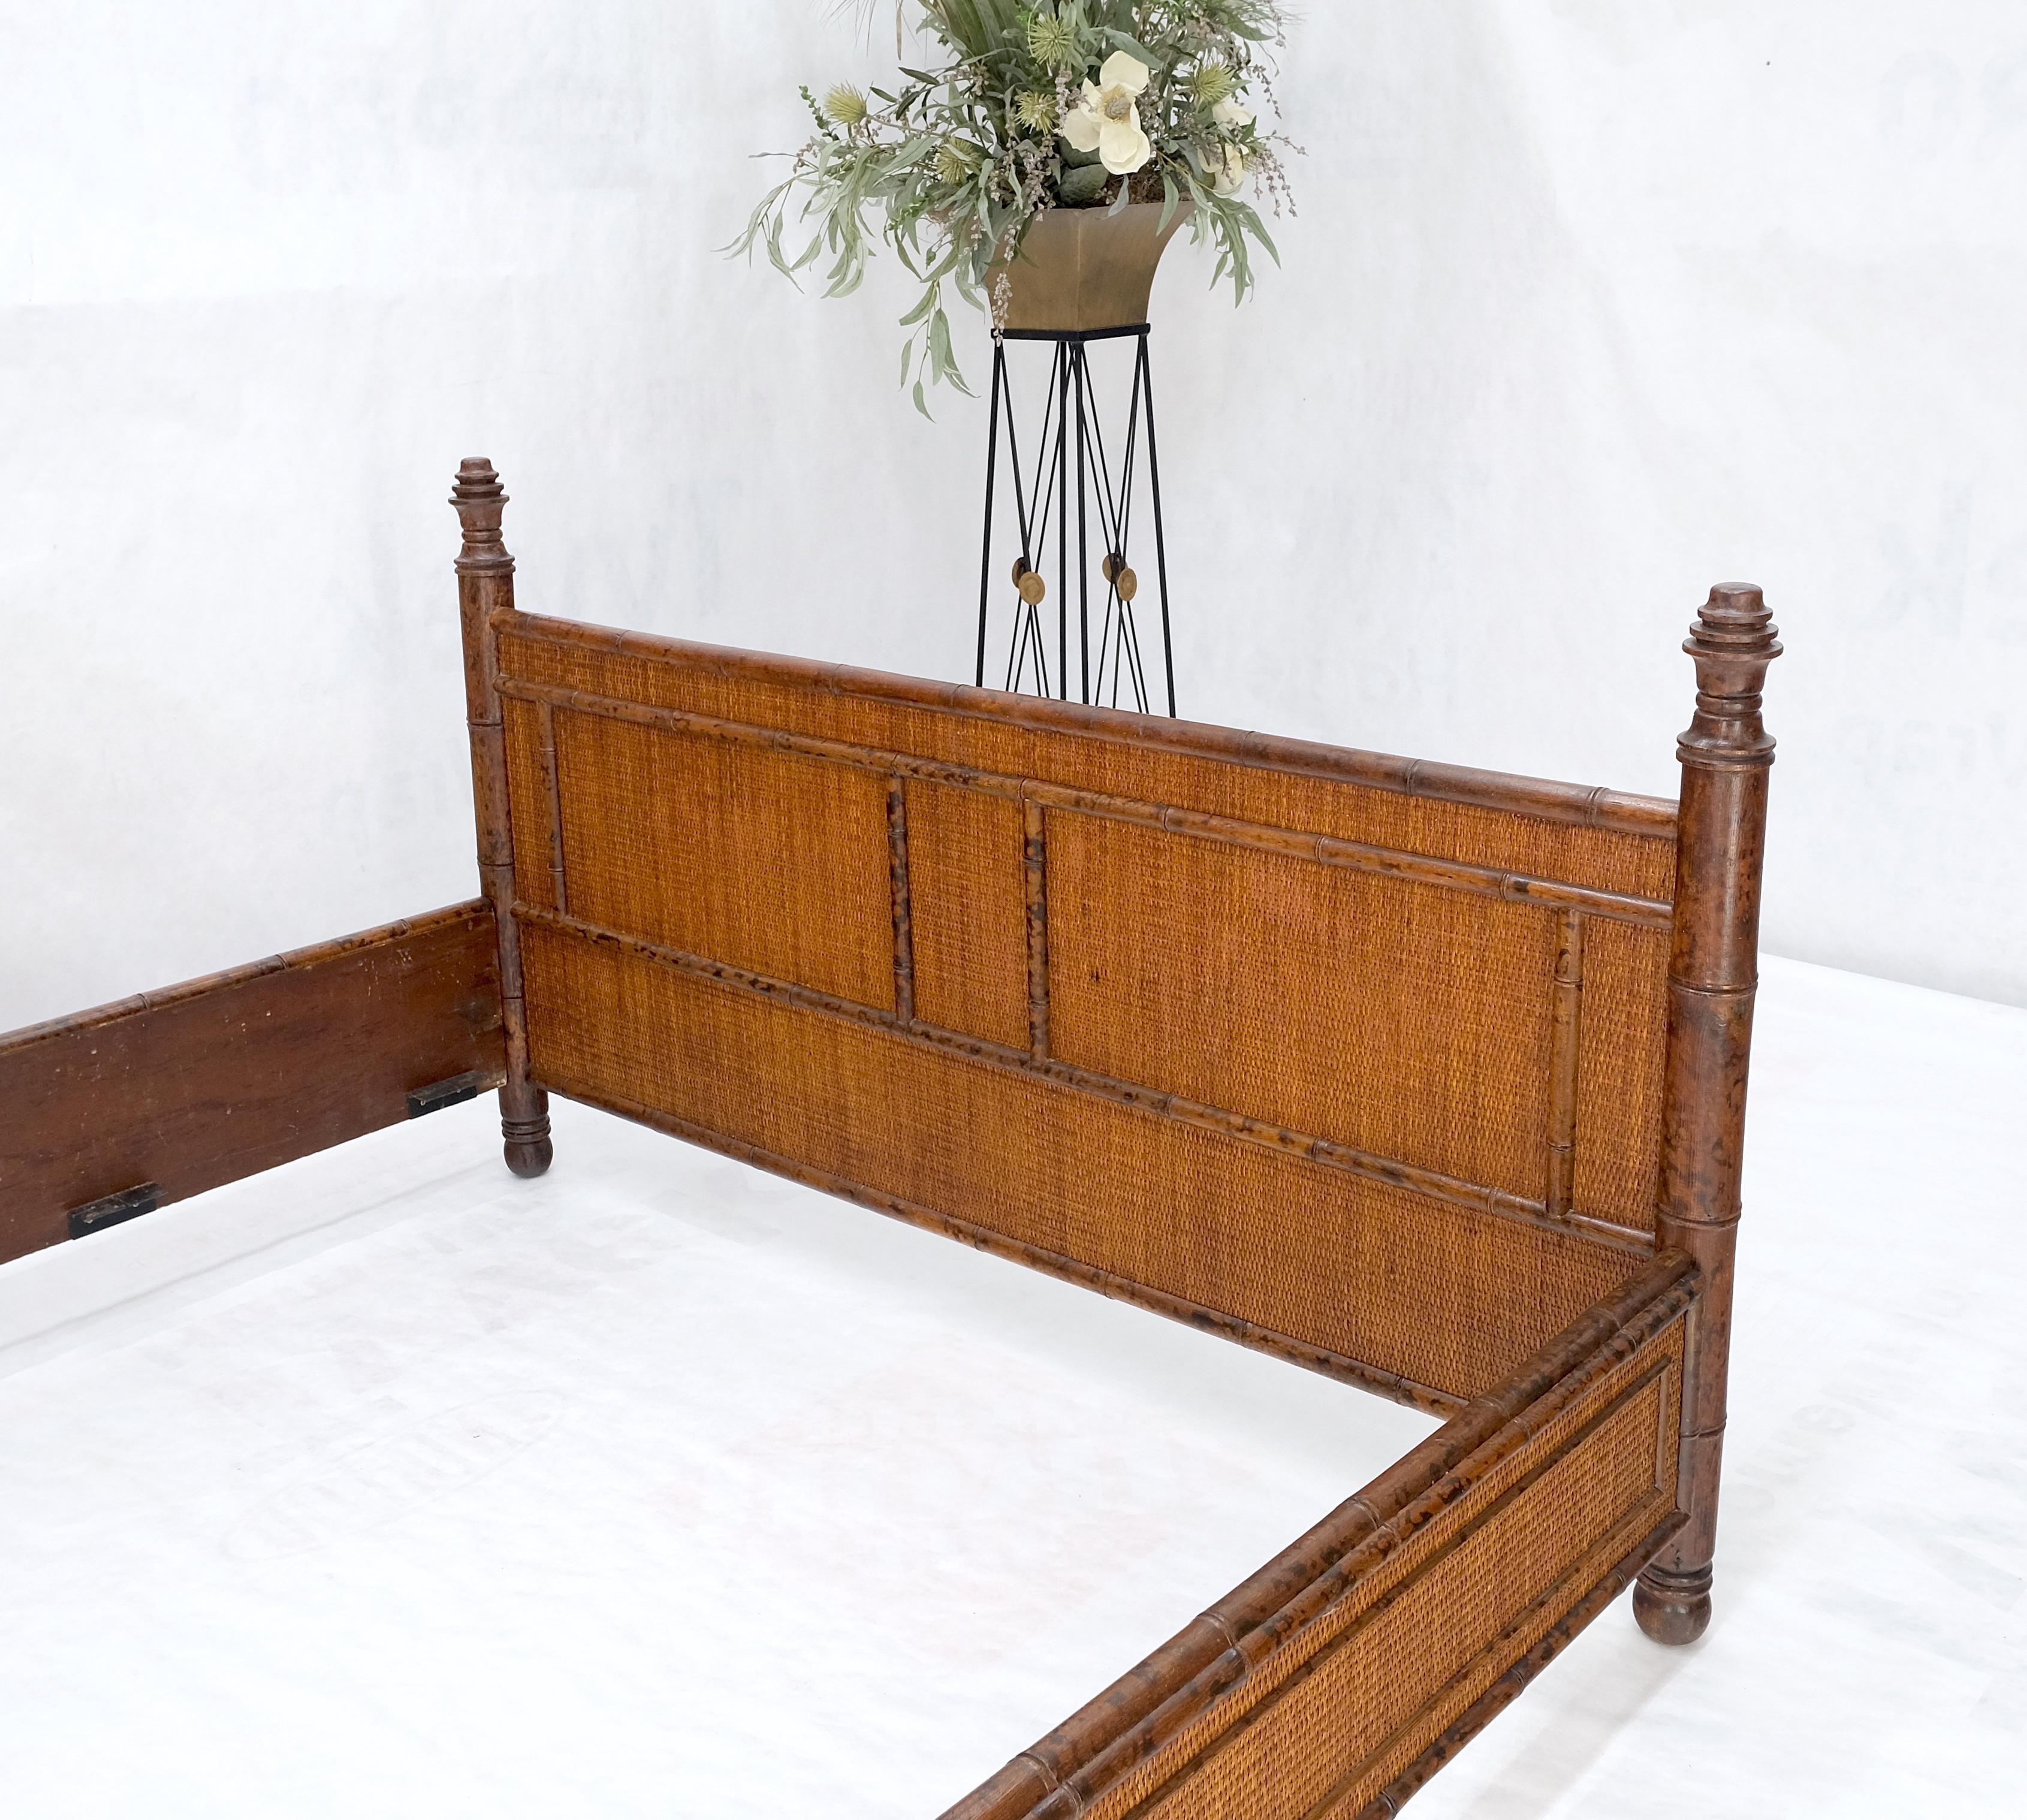 Faux Bamboo Cane Restored Queen Size Headboard Footboard Bed Bloomingdales MINT In Good Condition For Sale In Rockaway, NJ